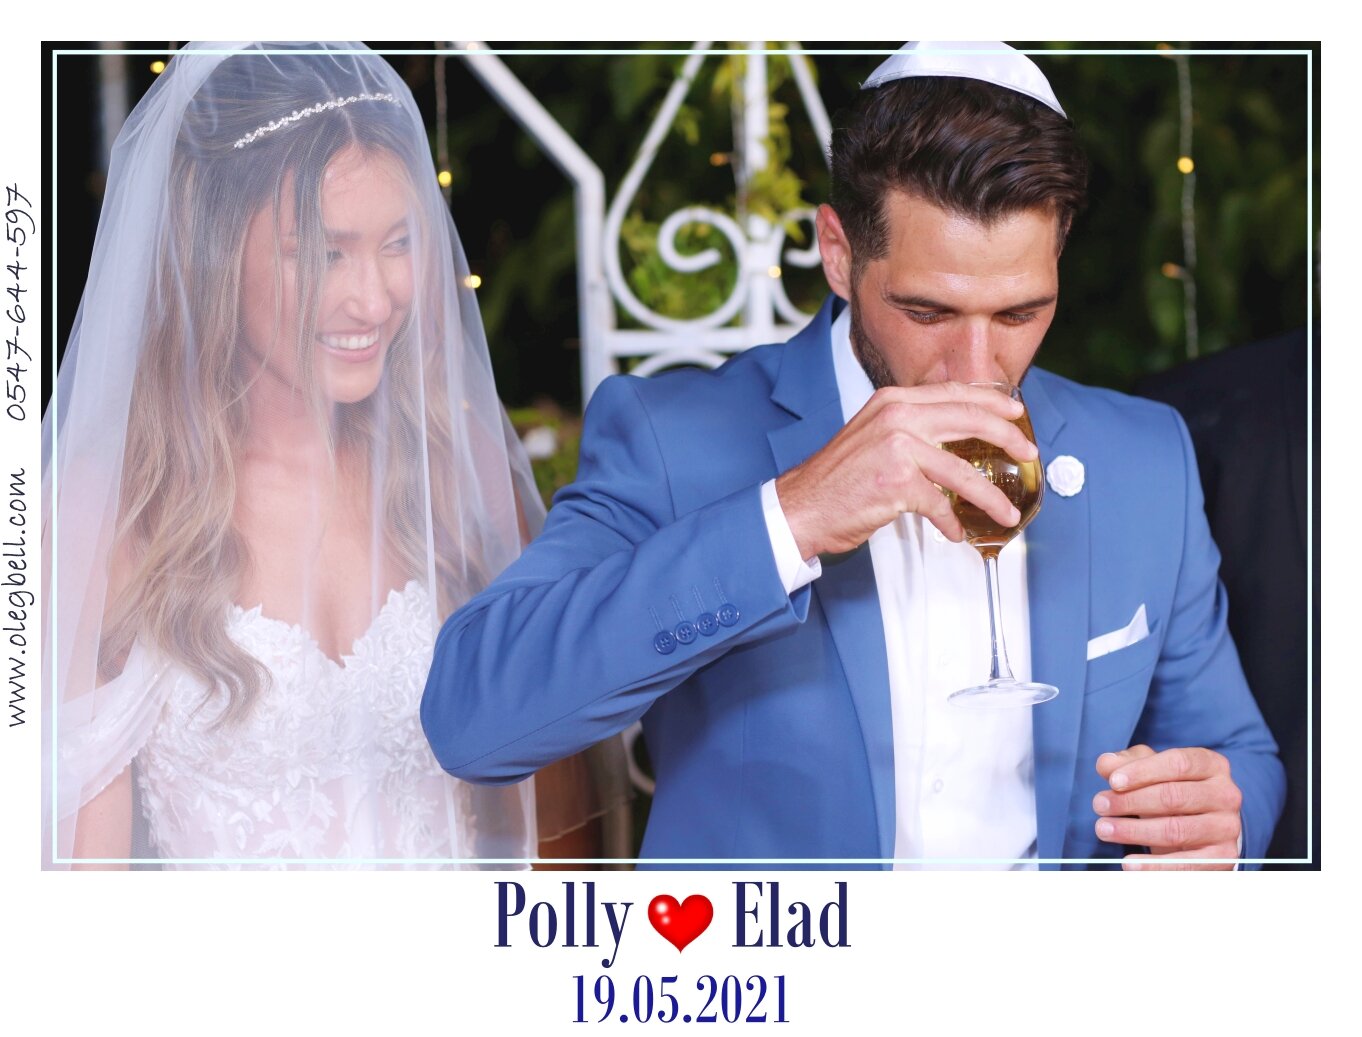 POLLY_AND_ELAD_WD_MG_SITE_022.JPG